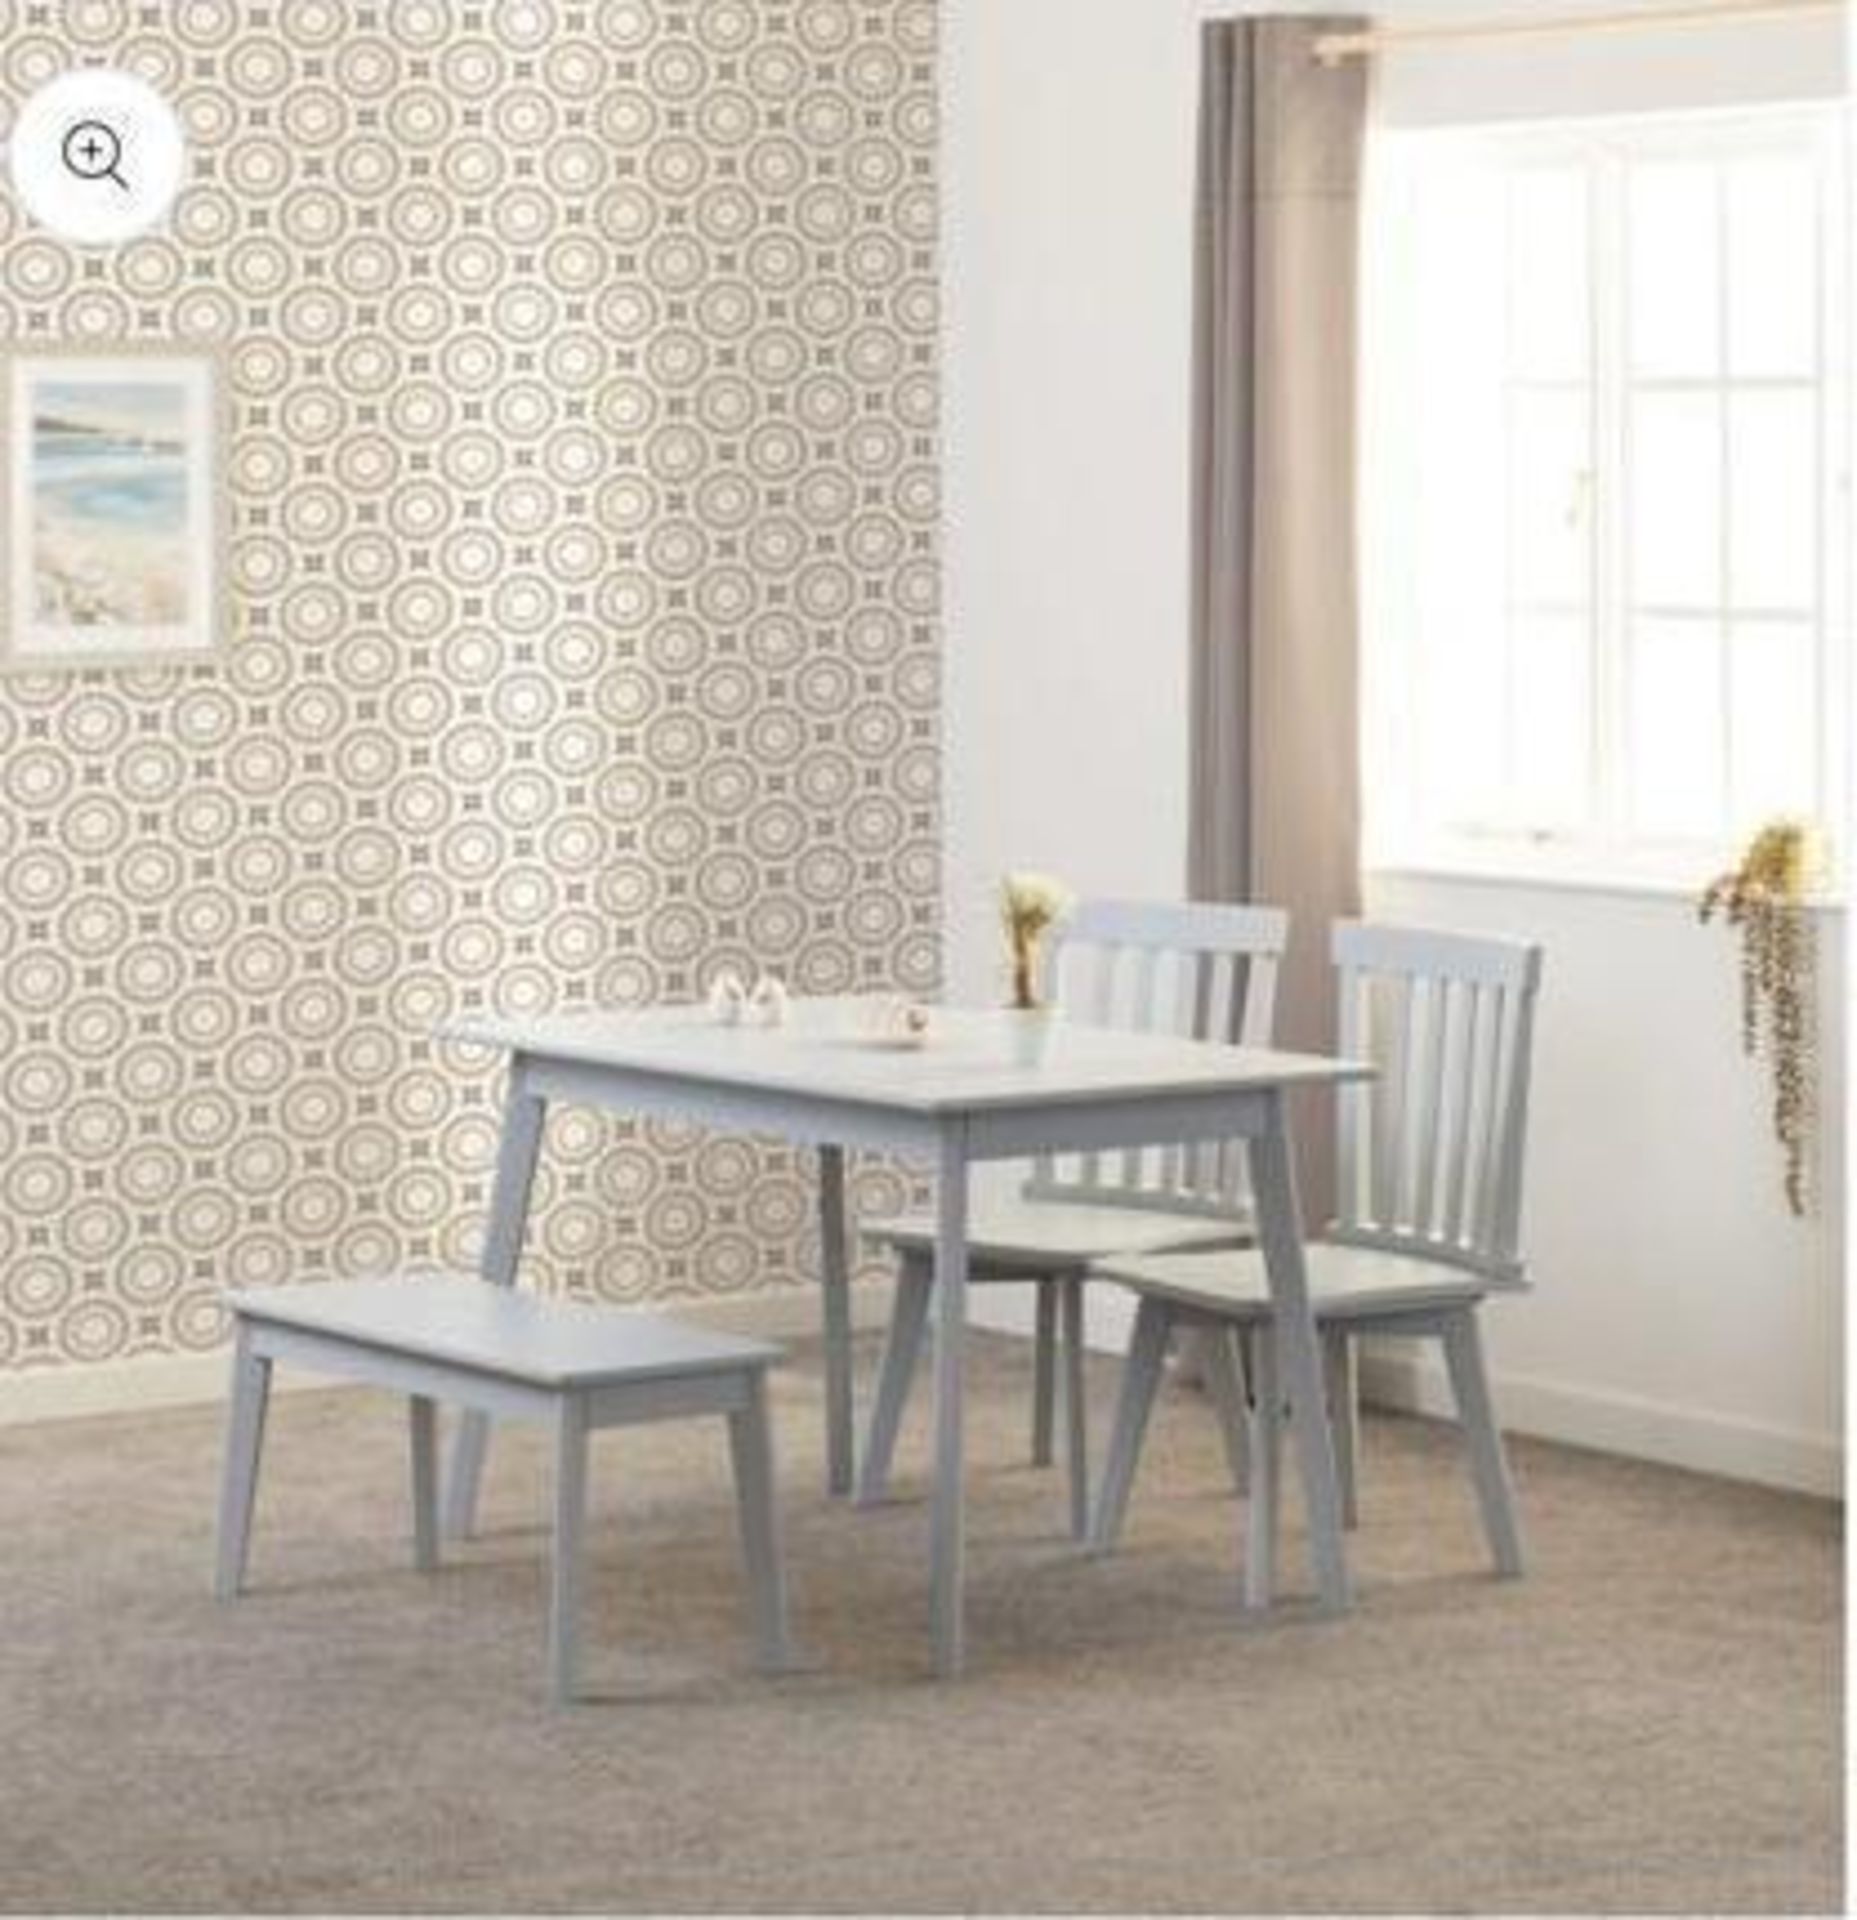 *BRAND NEW TRADE LOT* 15 X Flat packed Matlock grey wooden 4 seater dining set with bench. RRP: £279